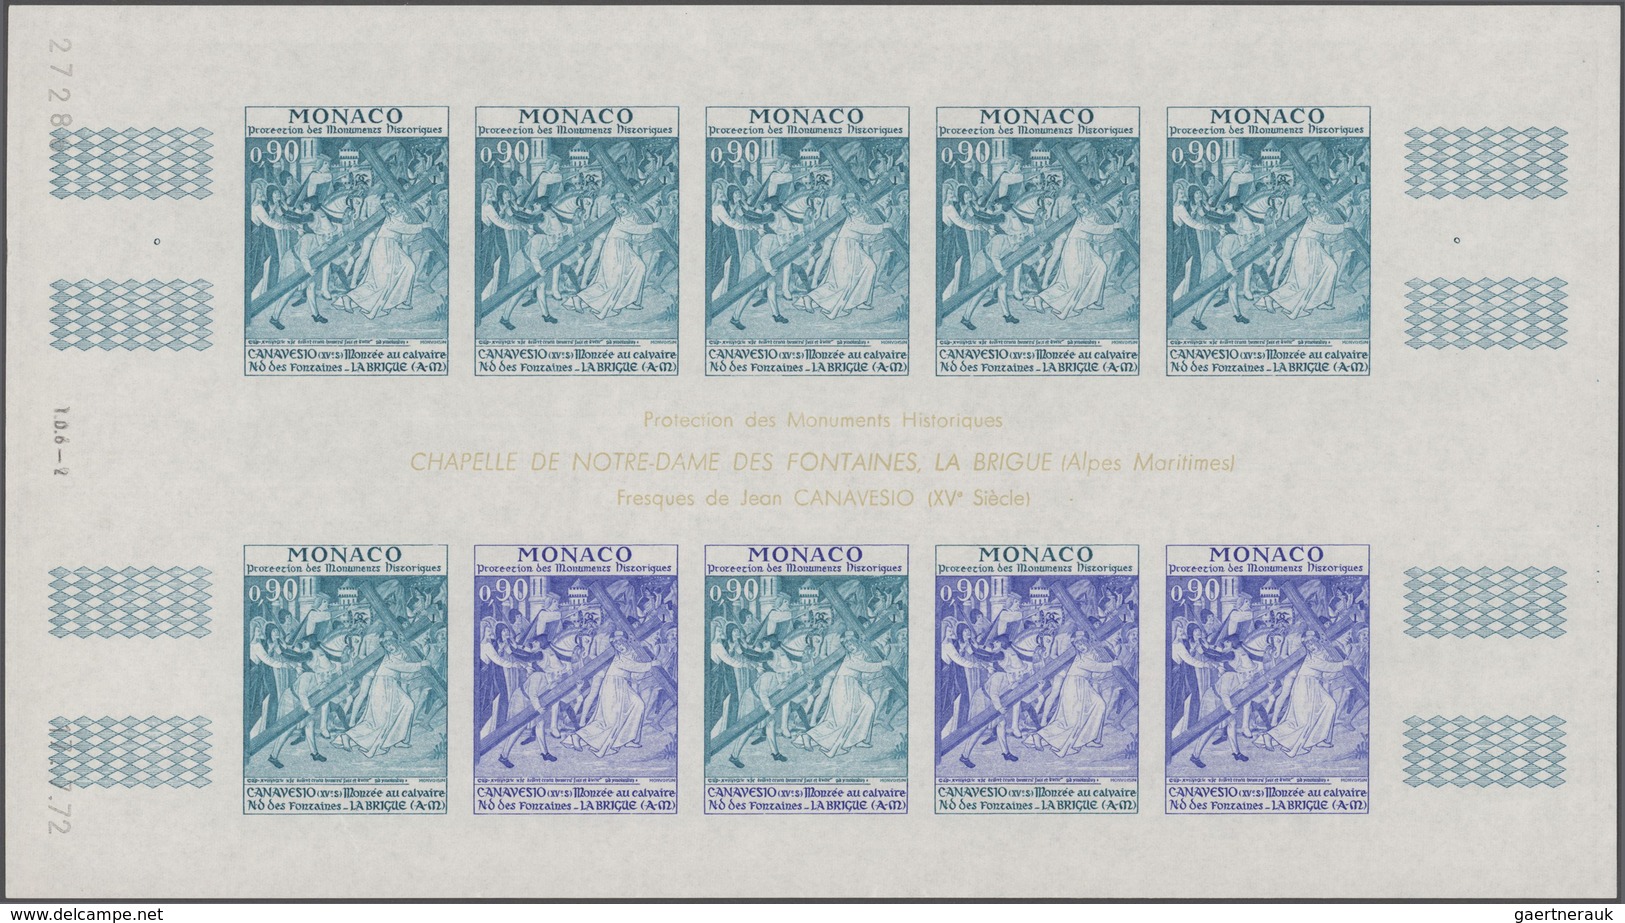 Monaco: 1972, Historic Preservation complete set of five with each value in two complete different I